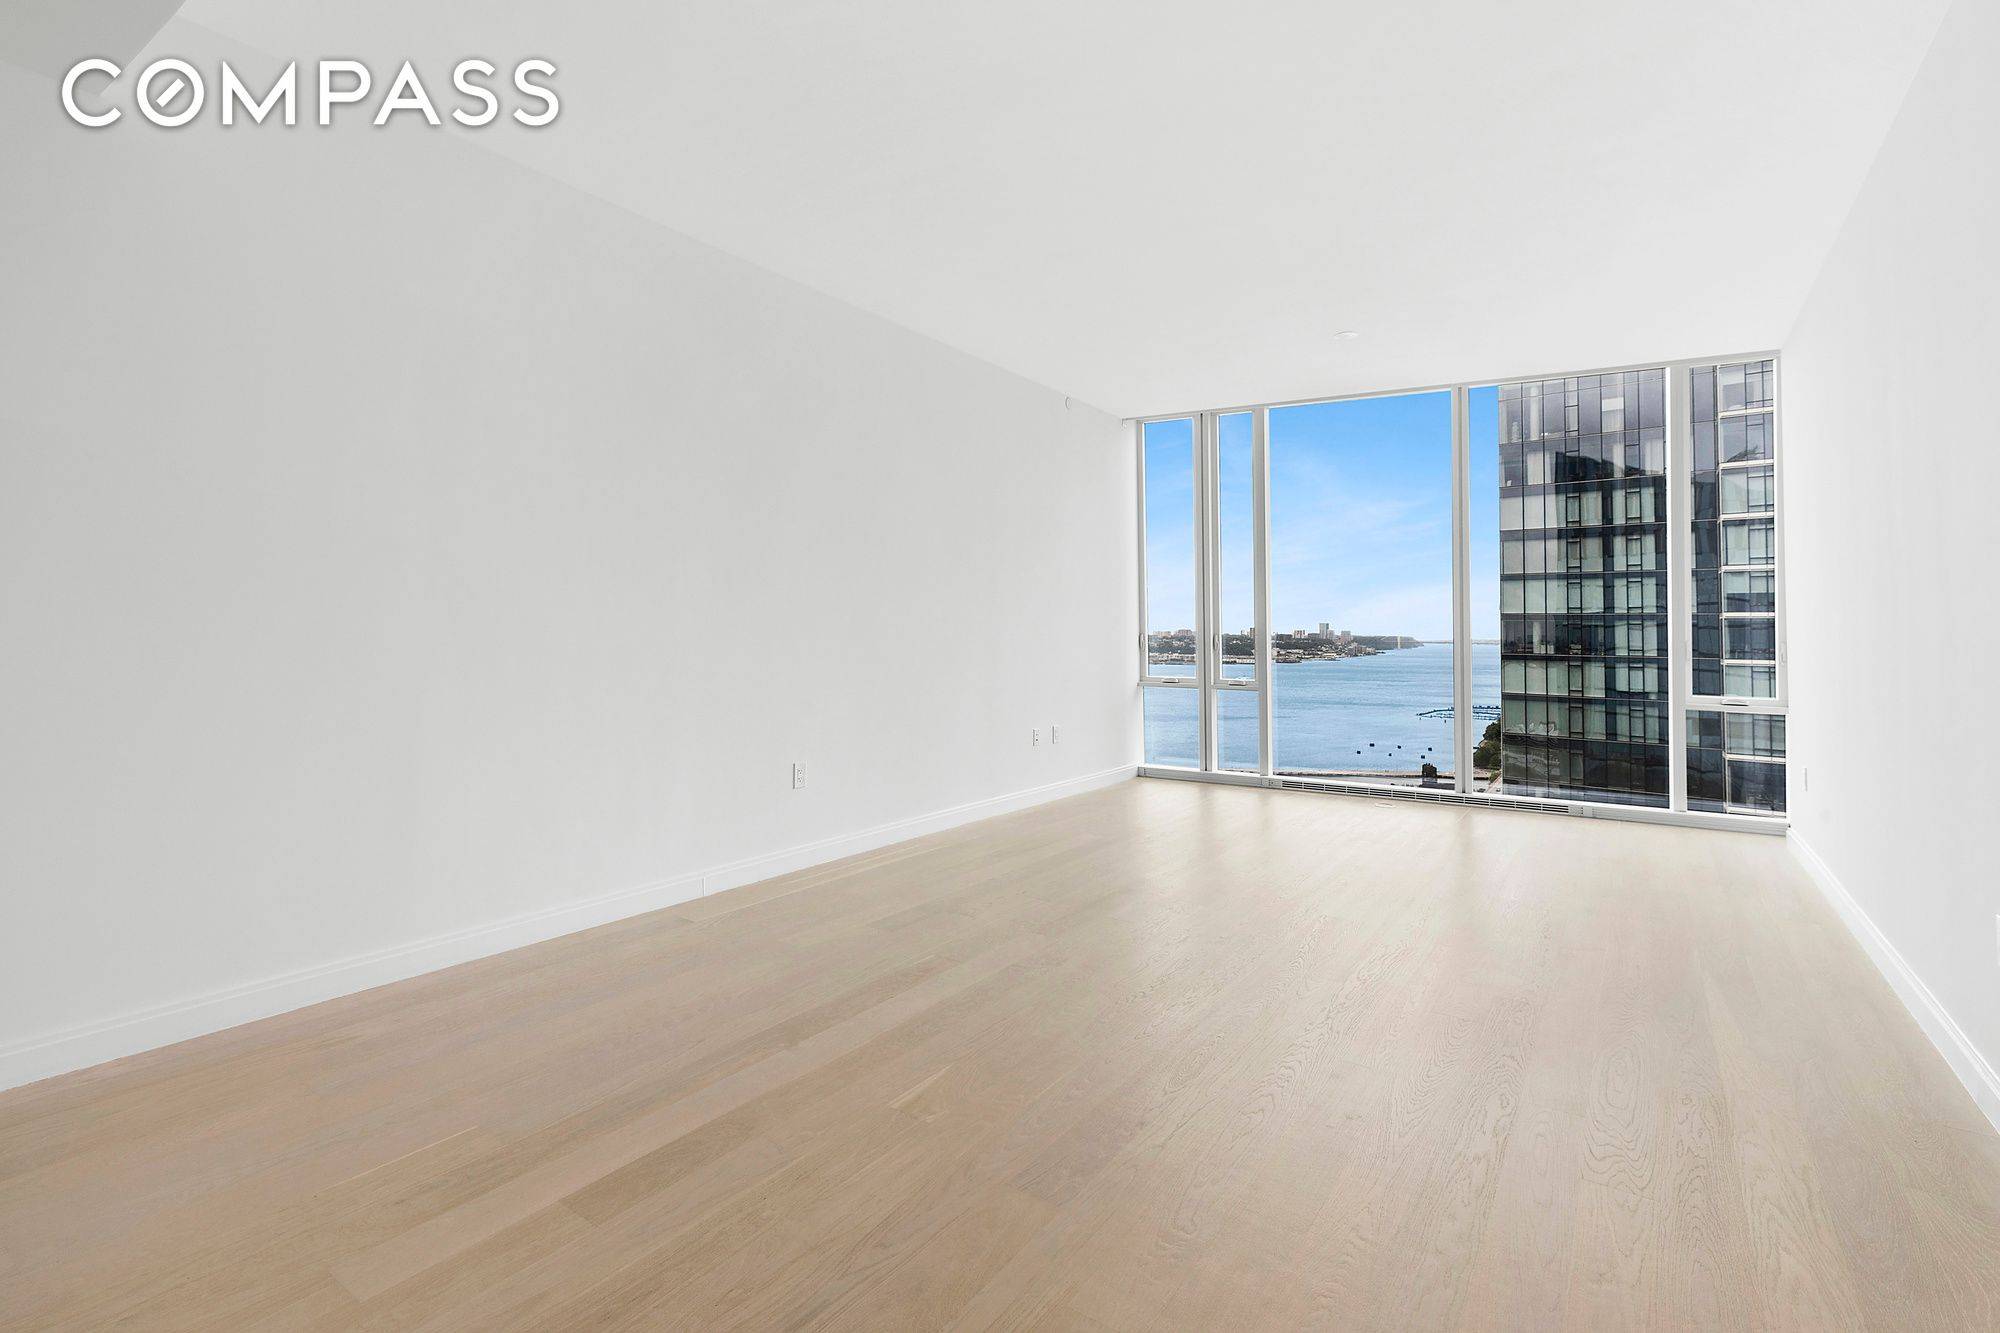 BRAND NEW APARTMENT ! Imparting Hudson River views to the North, this highest floor in the line two bedroom, two and a half bathroom residence at One Waterline Square is ...